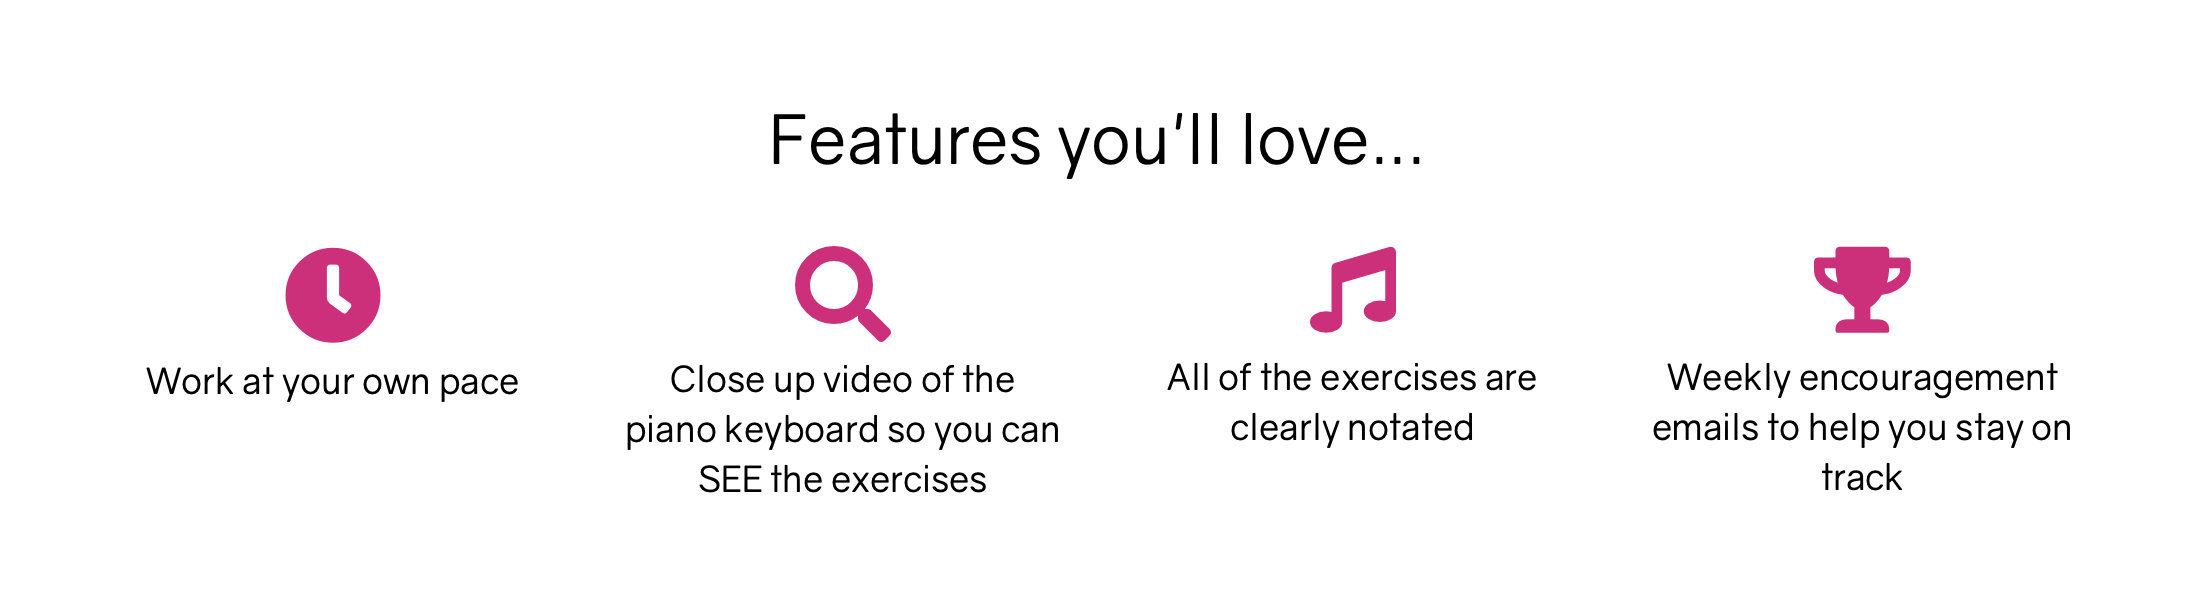 Features you&#39;ll love...Work at your own pace.  Close up video of the piano keyboard so you can see the exercises.  All of the exercises are clearly notated.  Weekly encouragement emails to help you stay on track.